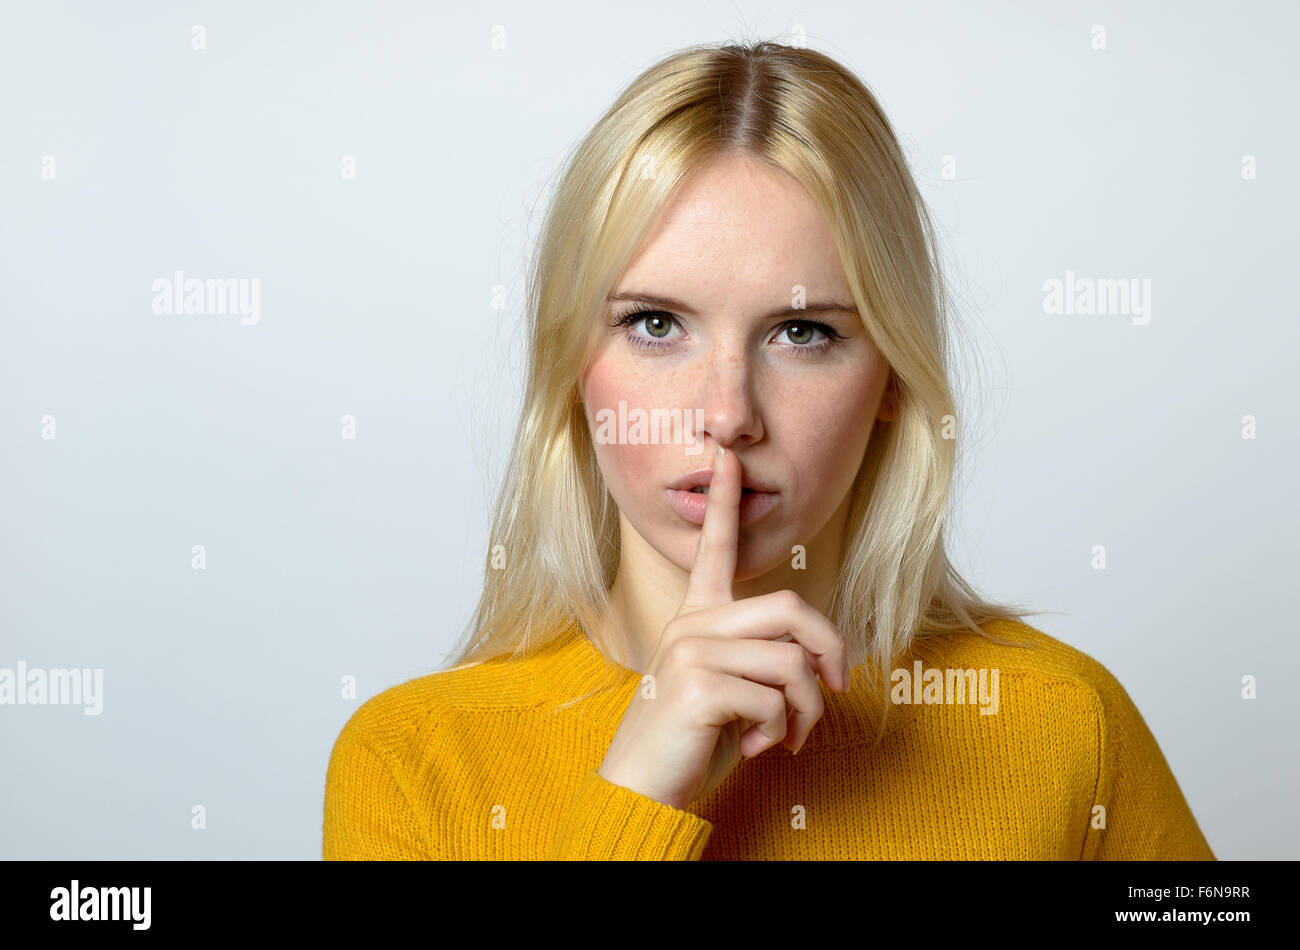 Close up Pretty Blond Woman Showing Shushing Gesture While Staring at the Camera Against Gray Background. Stock Photo